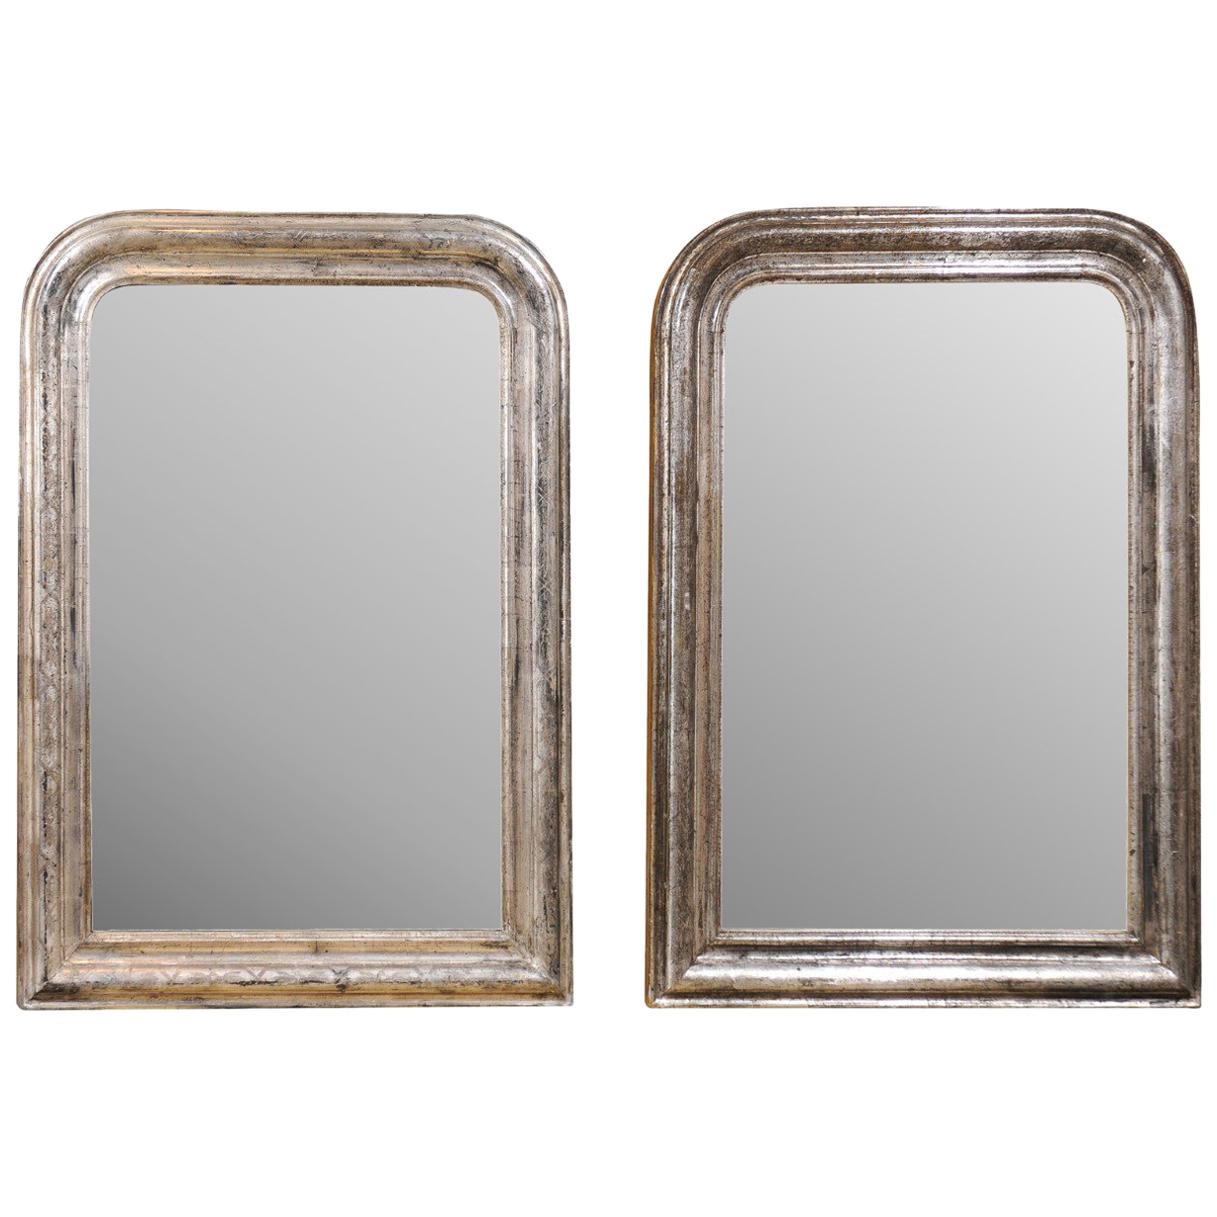 Pair of French Silver Gilt Louis-Philippe 19th Century Mirrors with Aged Patina